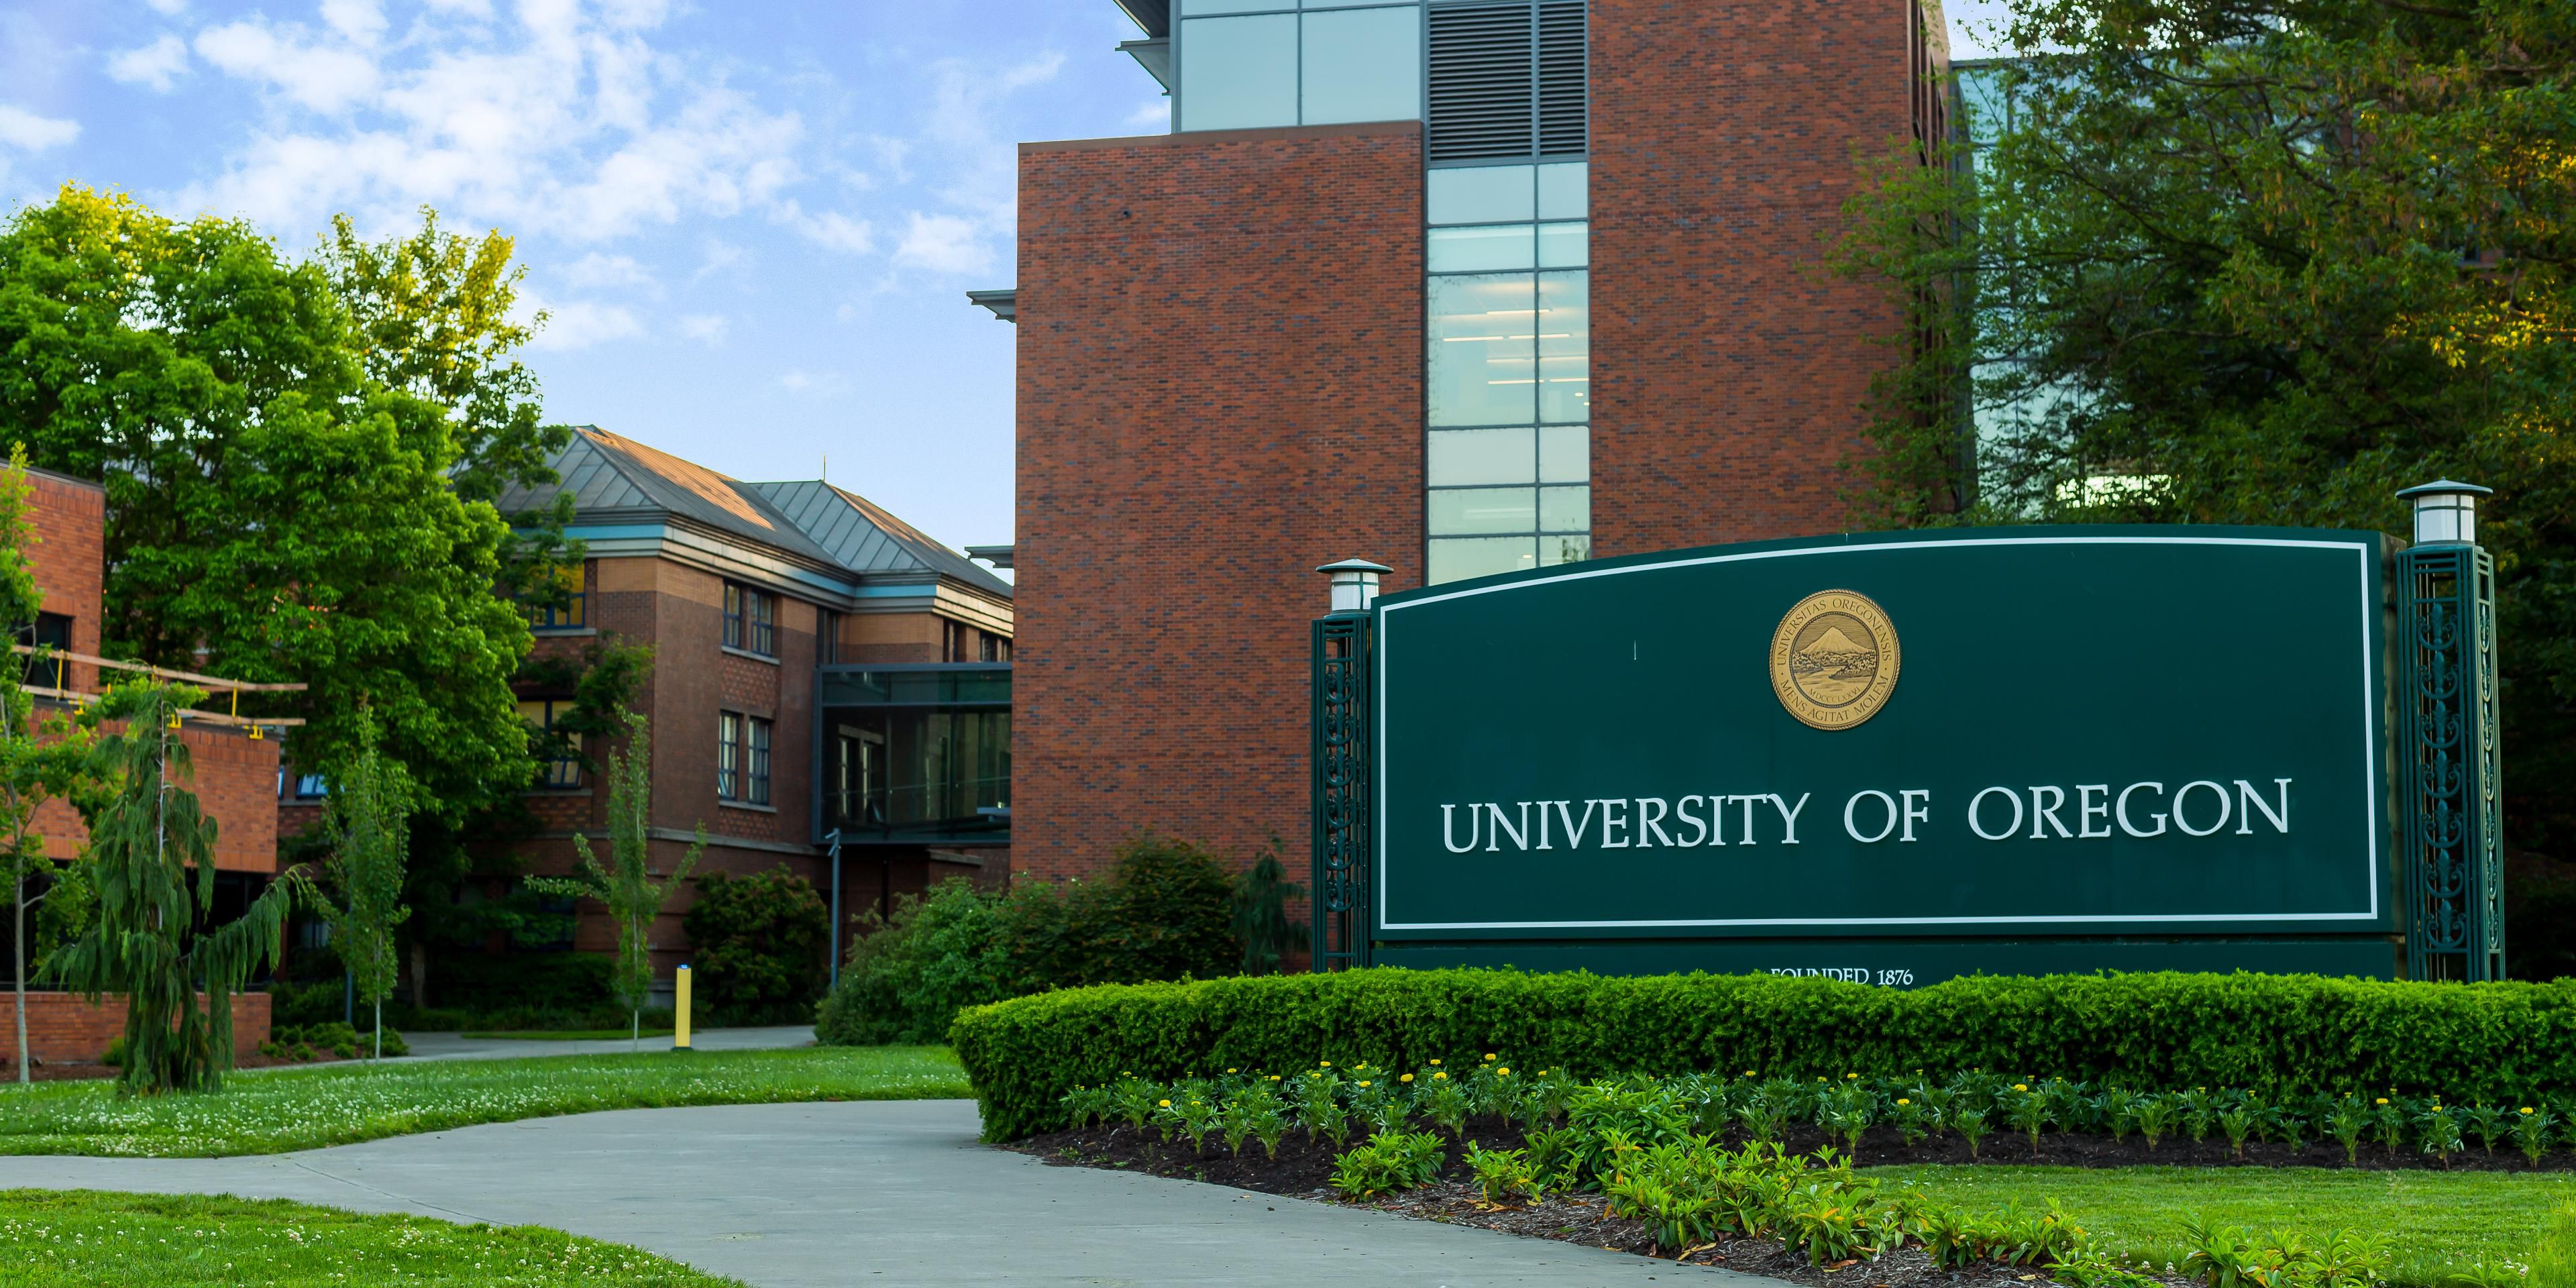 Whether you're a visiting professor or parent in town to visit your student, you'll enjoy our convenient location near the University of Oregon!  Administration buildings, sports venues, and bus lines are all within walking distance from your hotel door.  You'll love the quick commute!